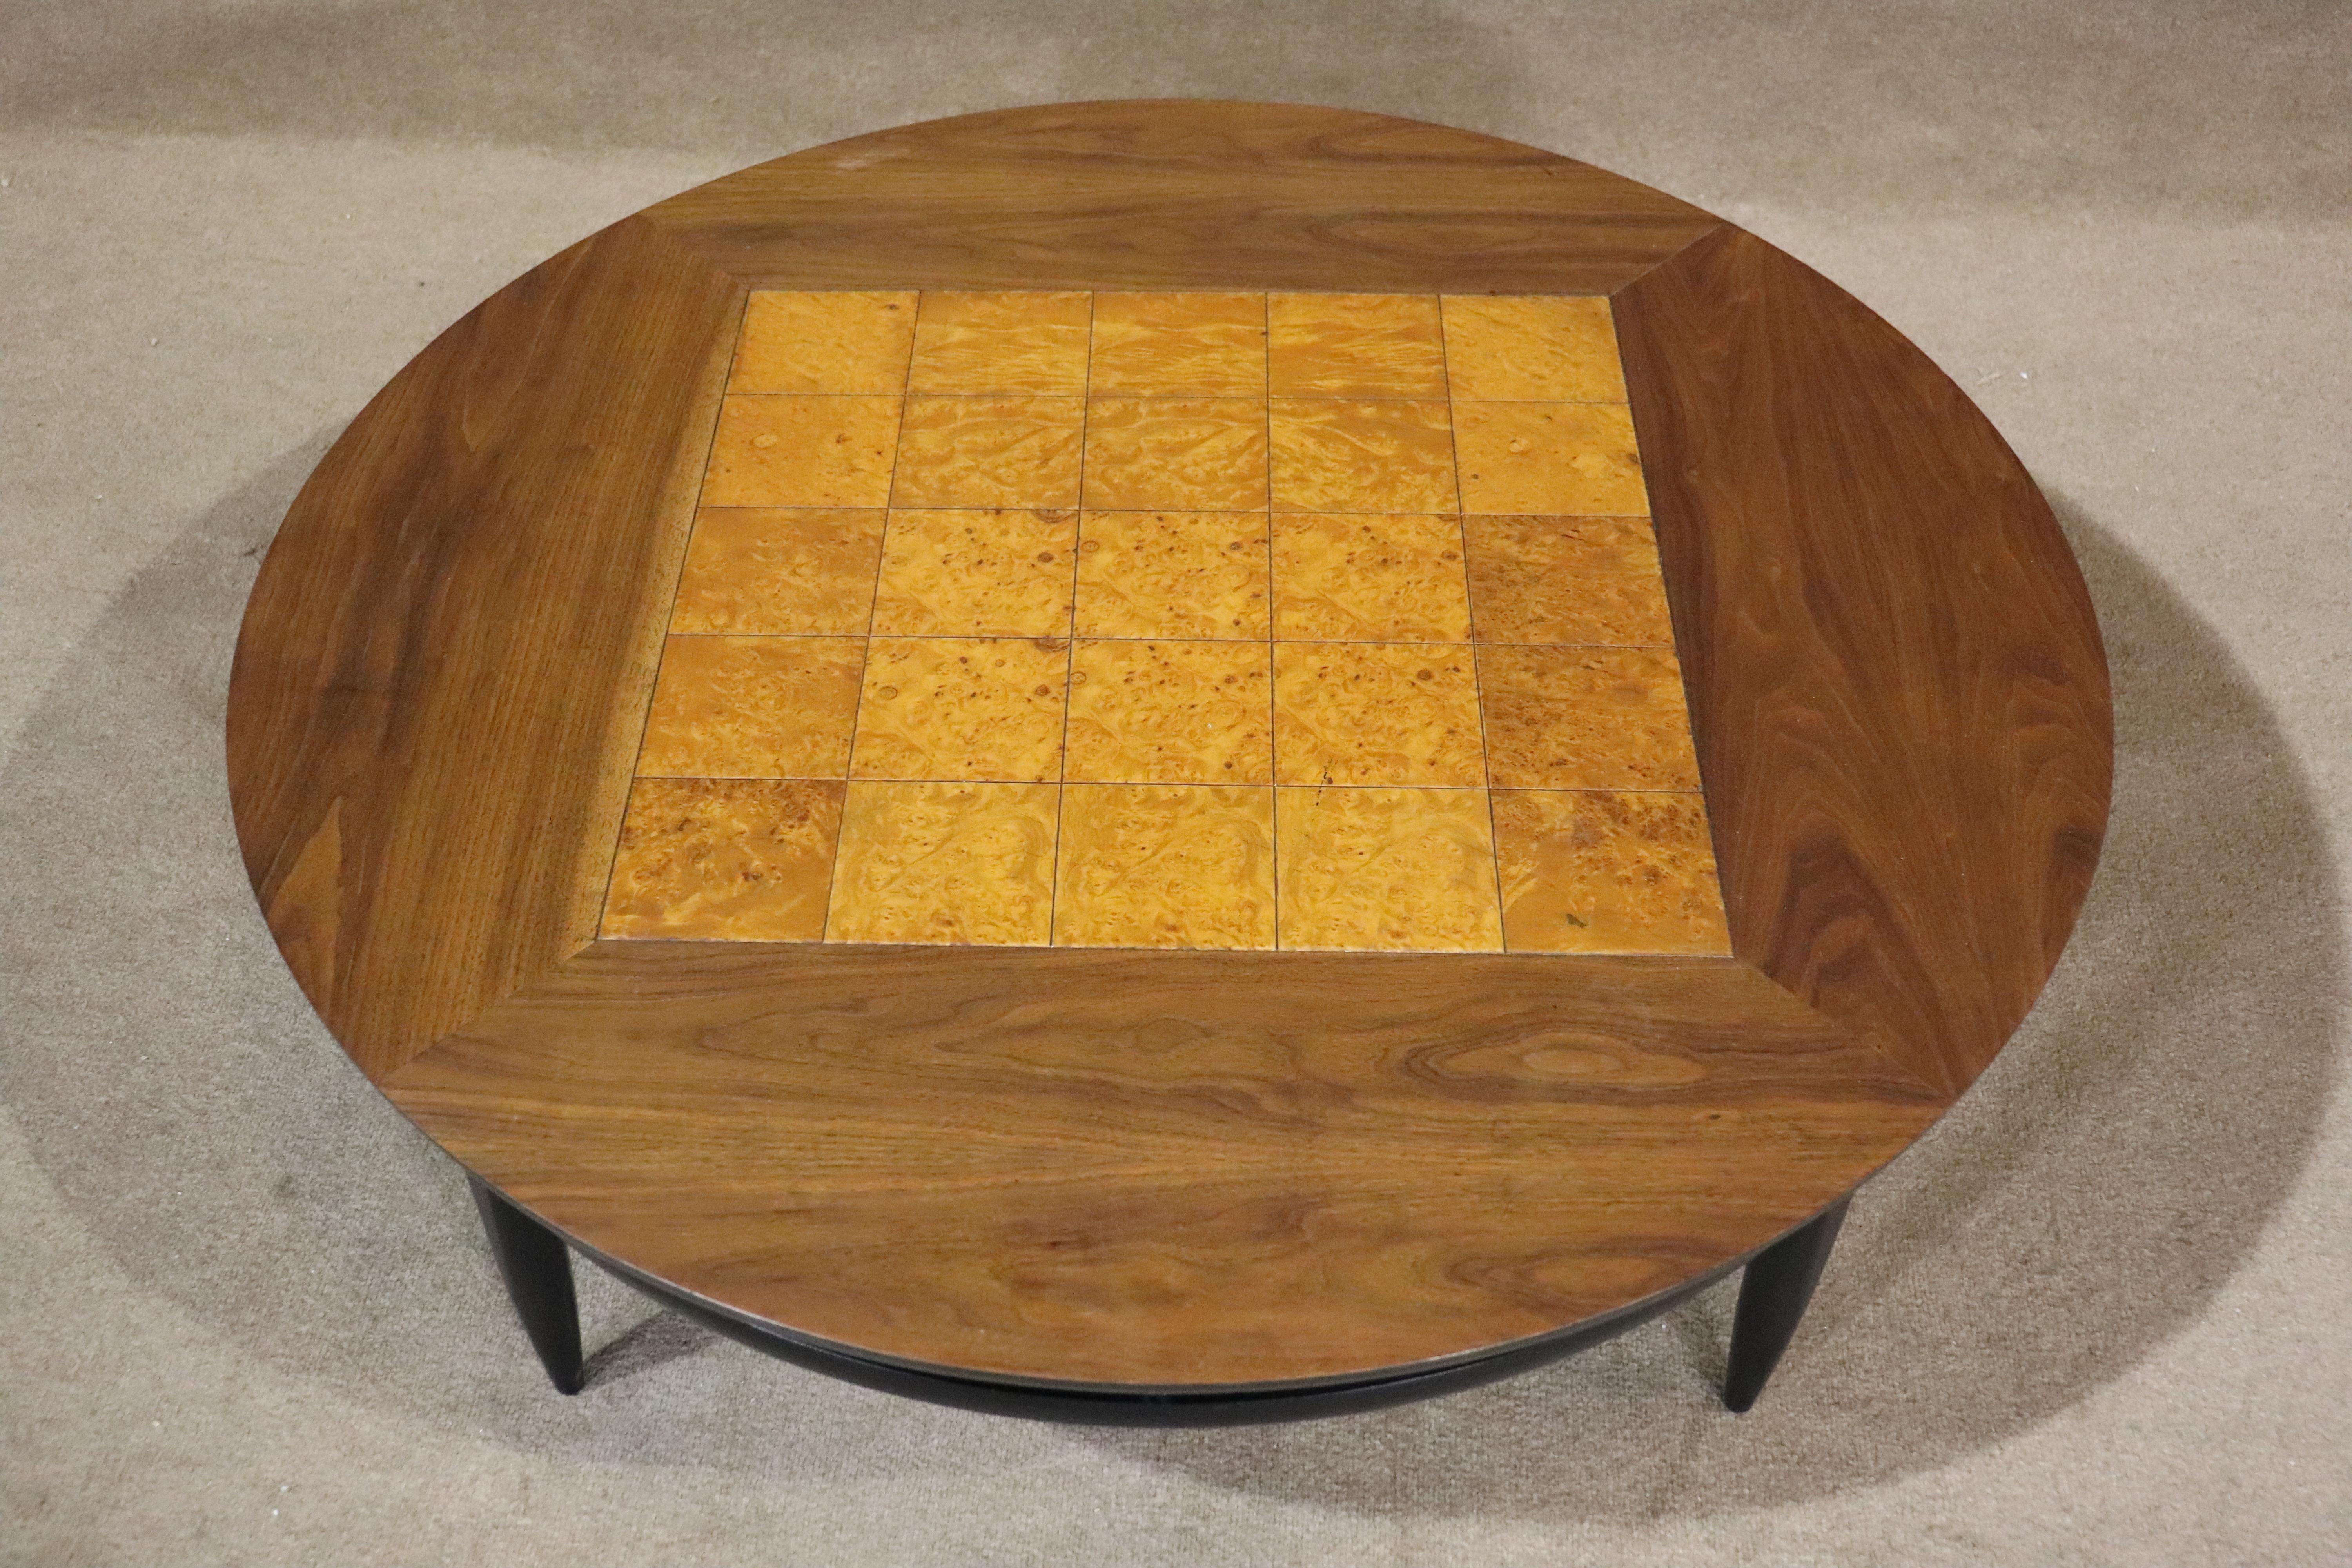 Round mid-century modern style coffee table with inlay burl wood set inside walnut frame, on an ebonized base.
Please confirm location NY or NJ